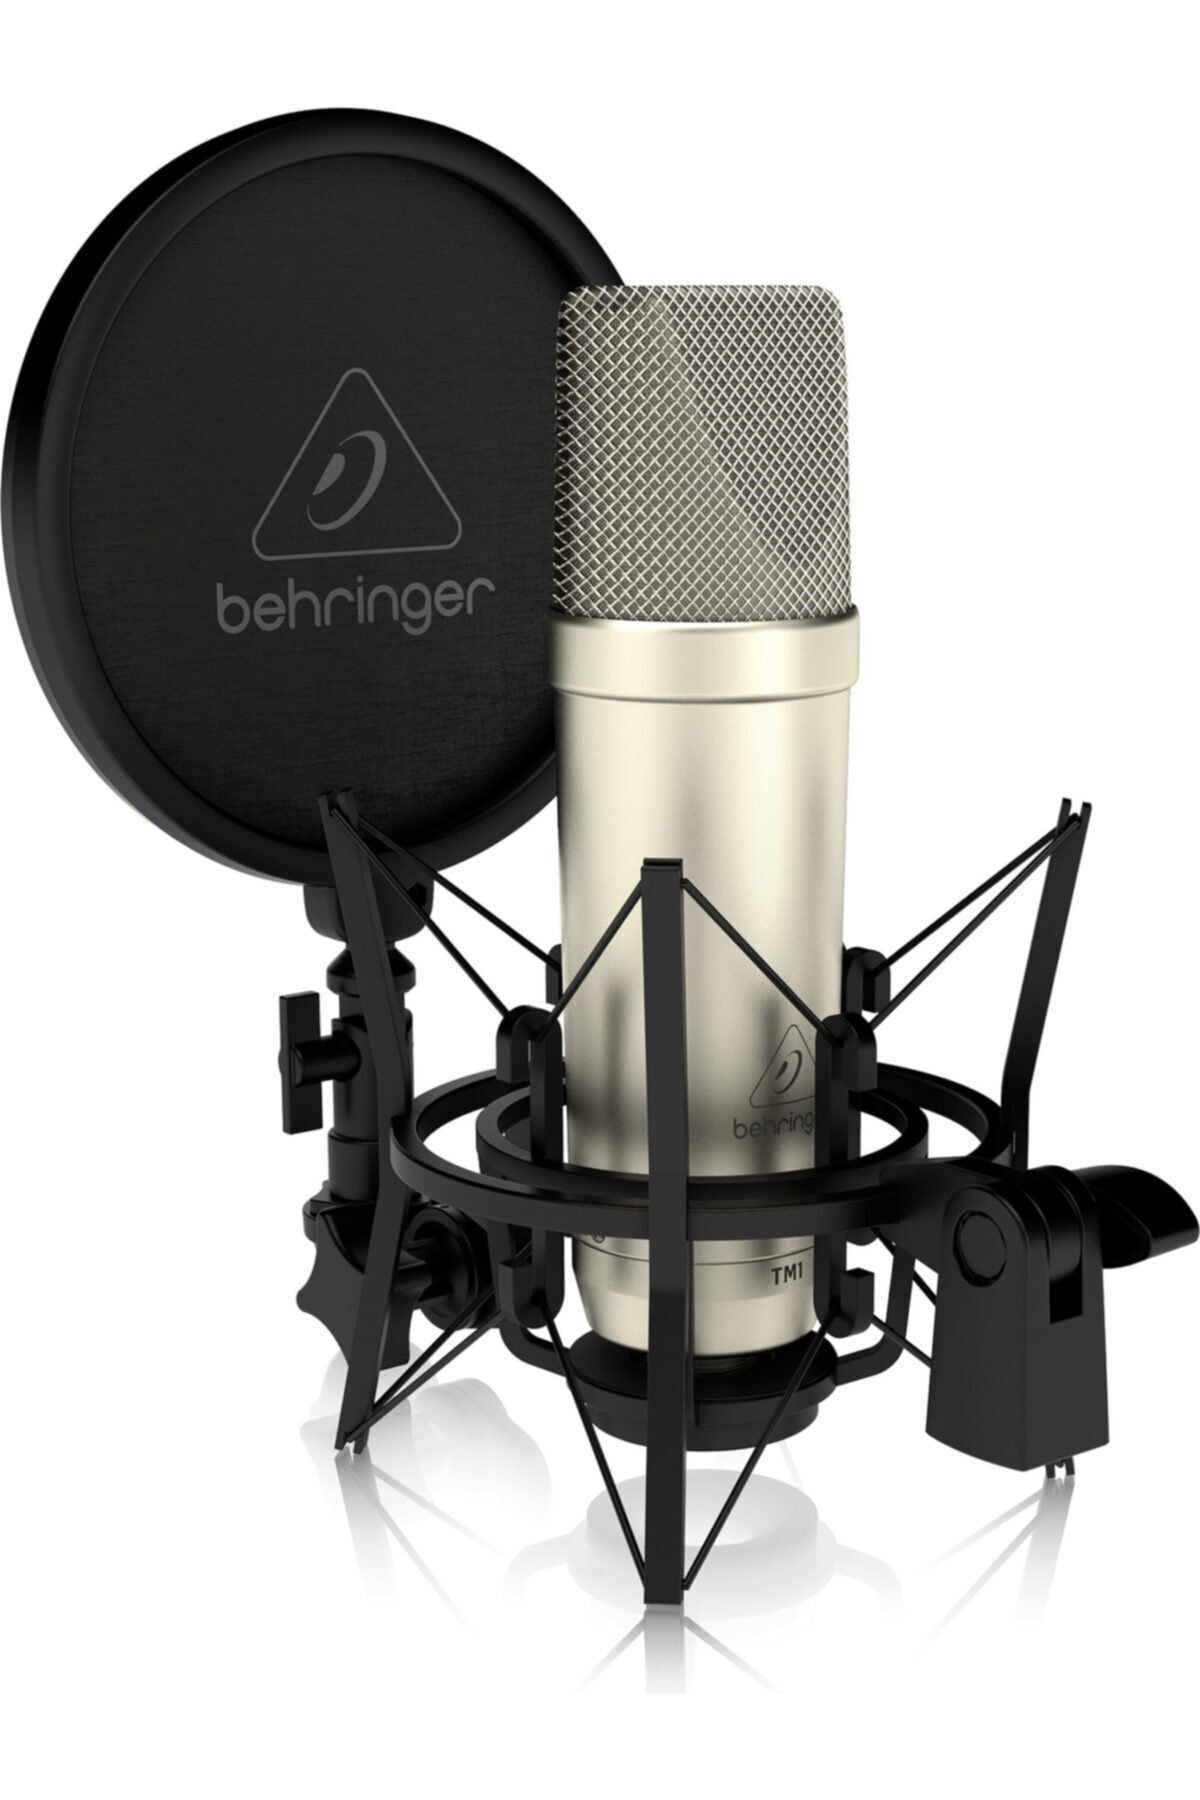 Behringer Tm1 Complete Recording Package With Large Diaphragm Condenser Microphone